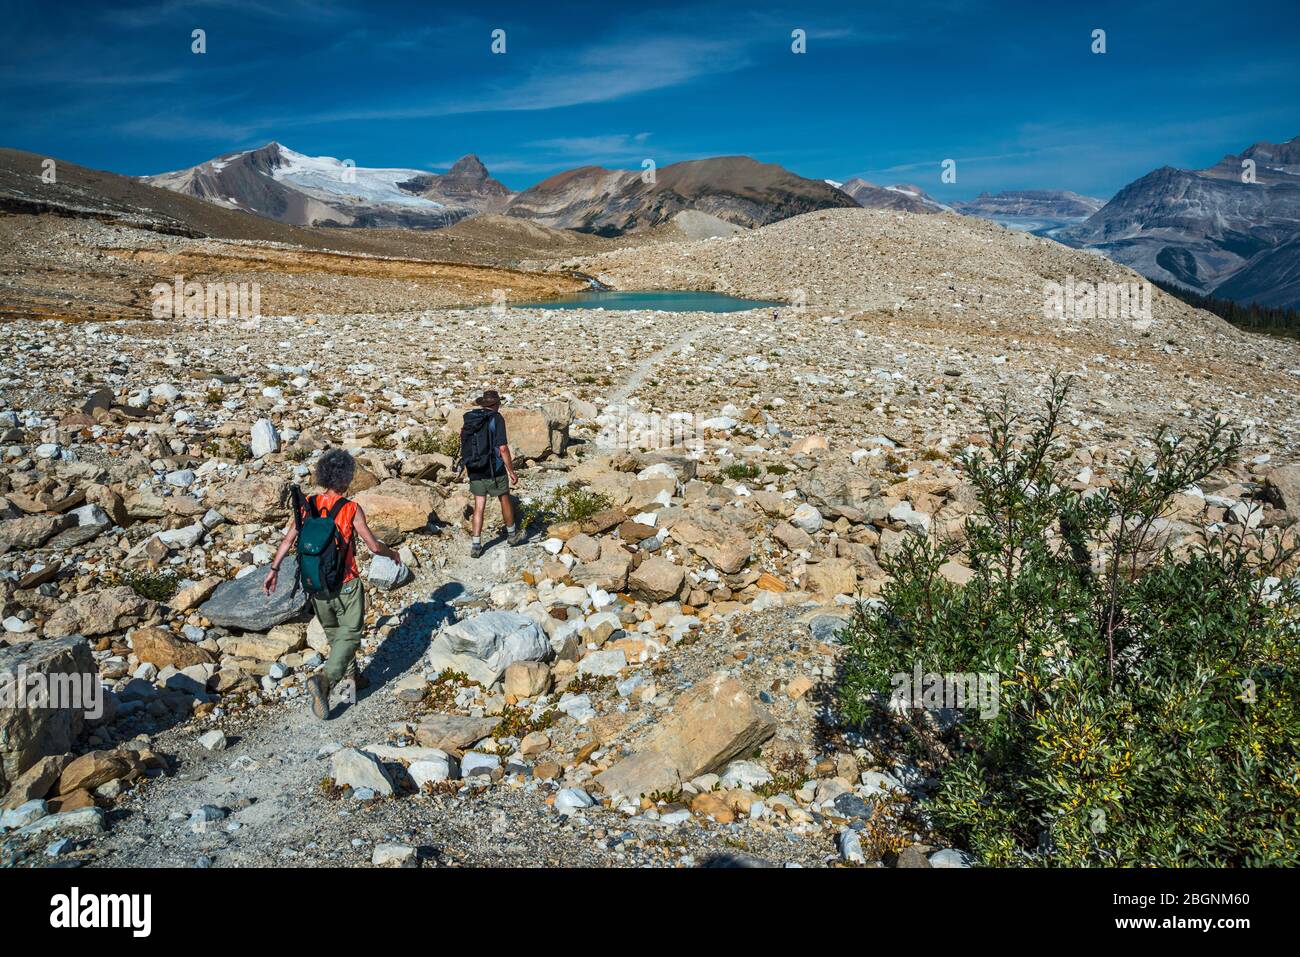 Hikers on Iceline Trail, Glacier des Poilus in far distance, Canadian Rockies, Yoho National Park, British Columbia, Canada Stock Photo